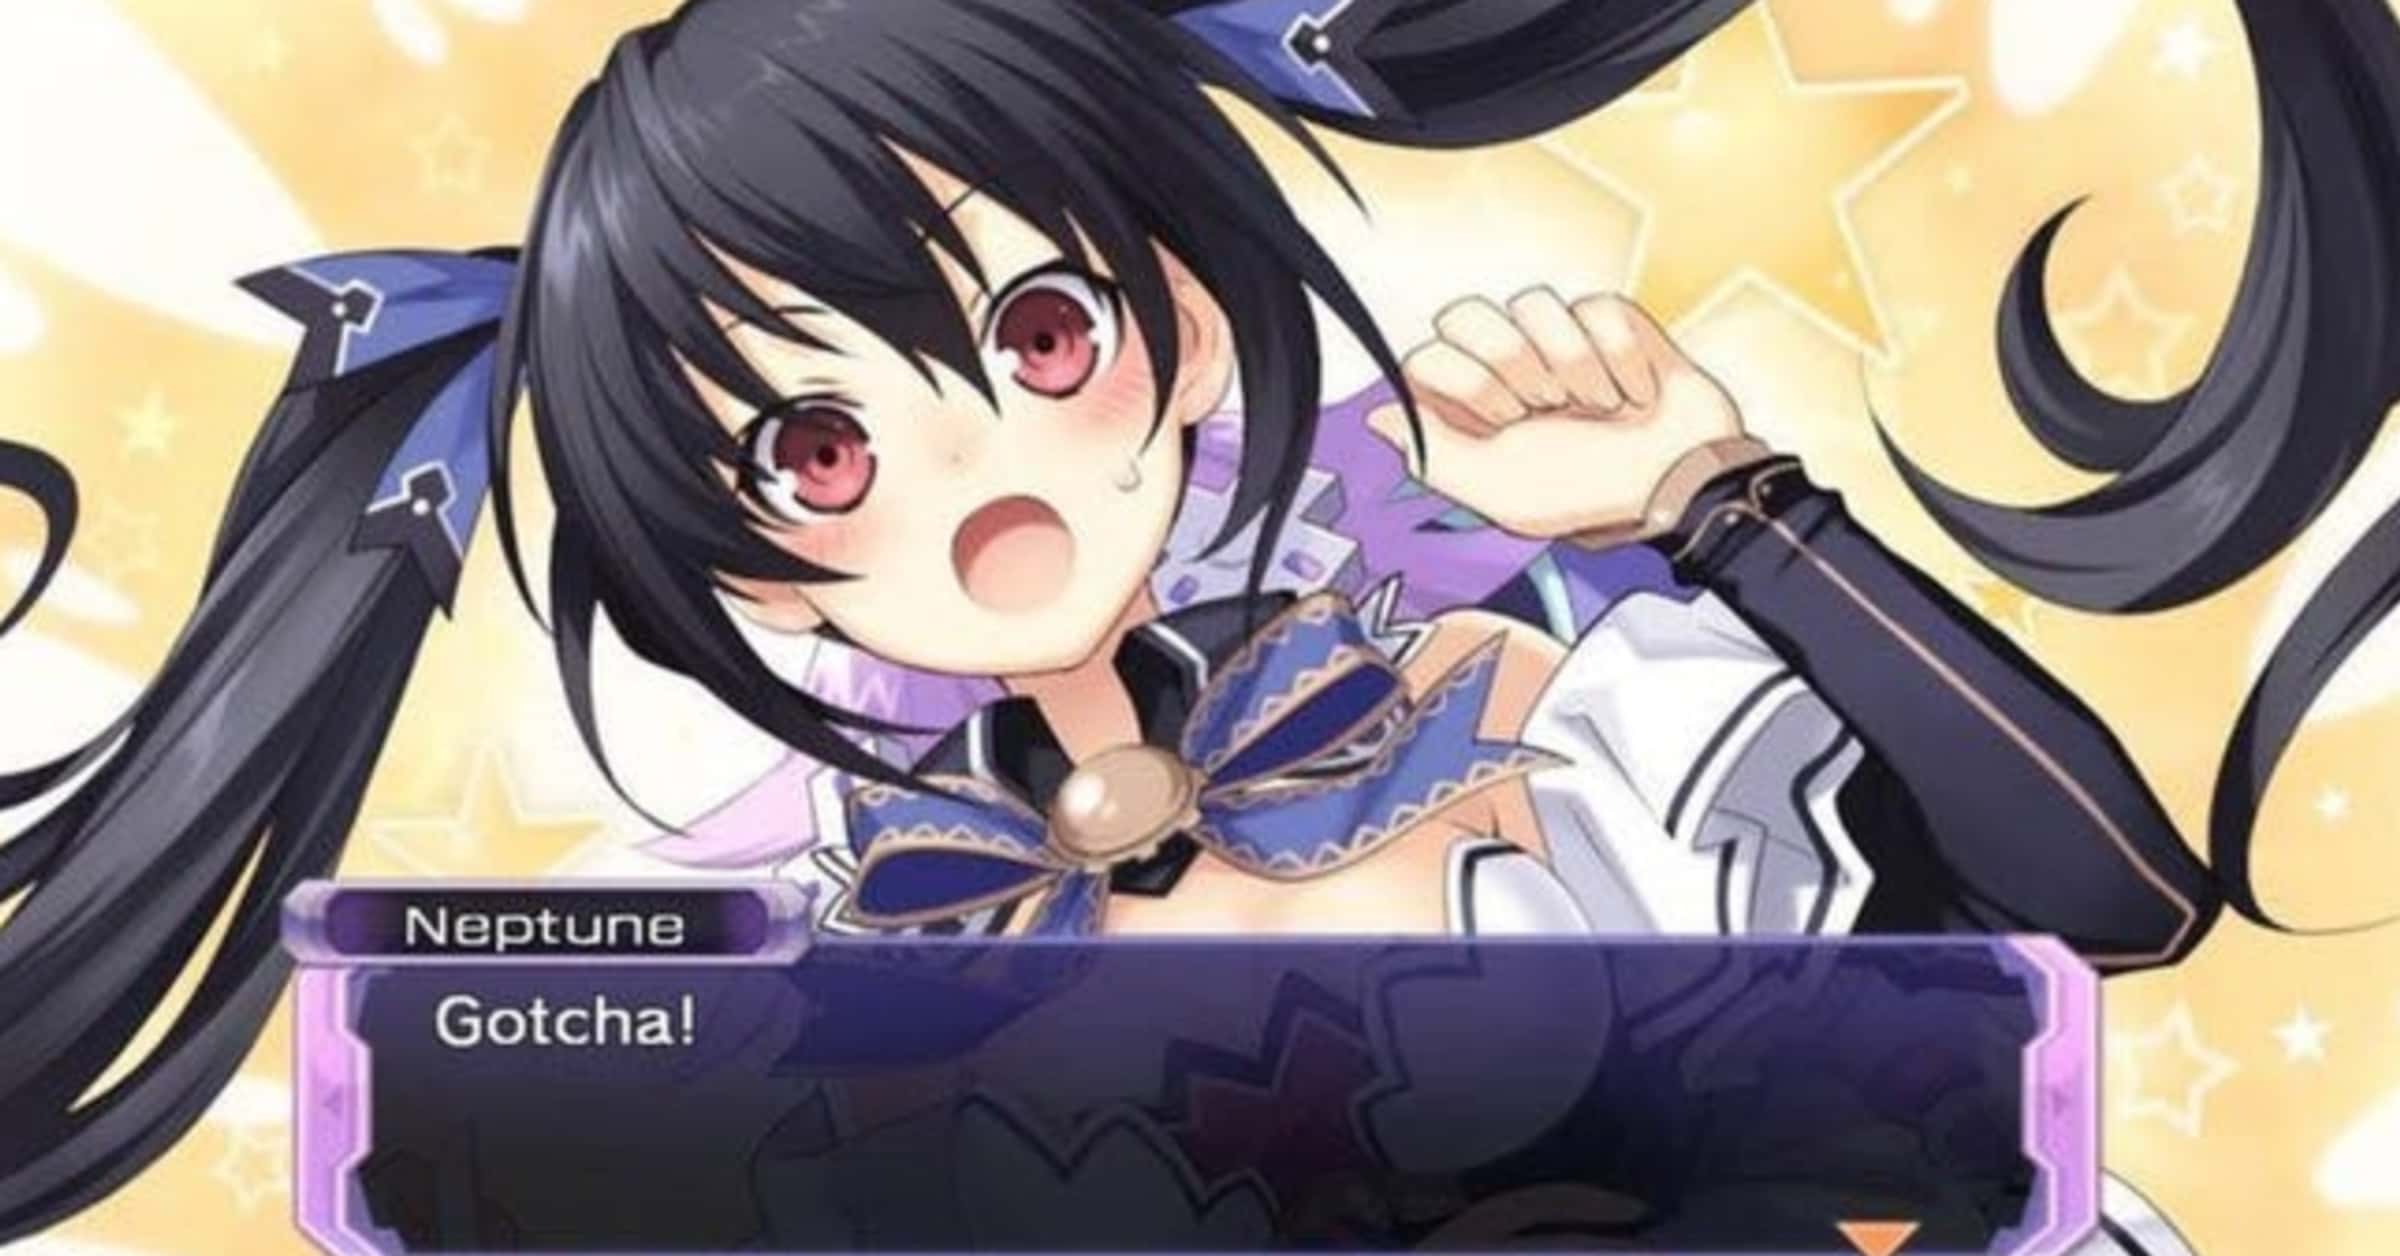 Sex On Nude Beach Hentai - The 15 Best Ecchi Anime Video Games You Should Check Out